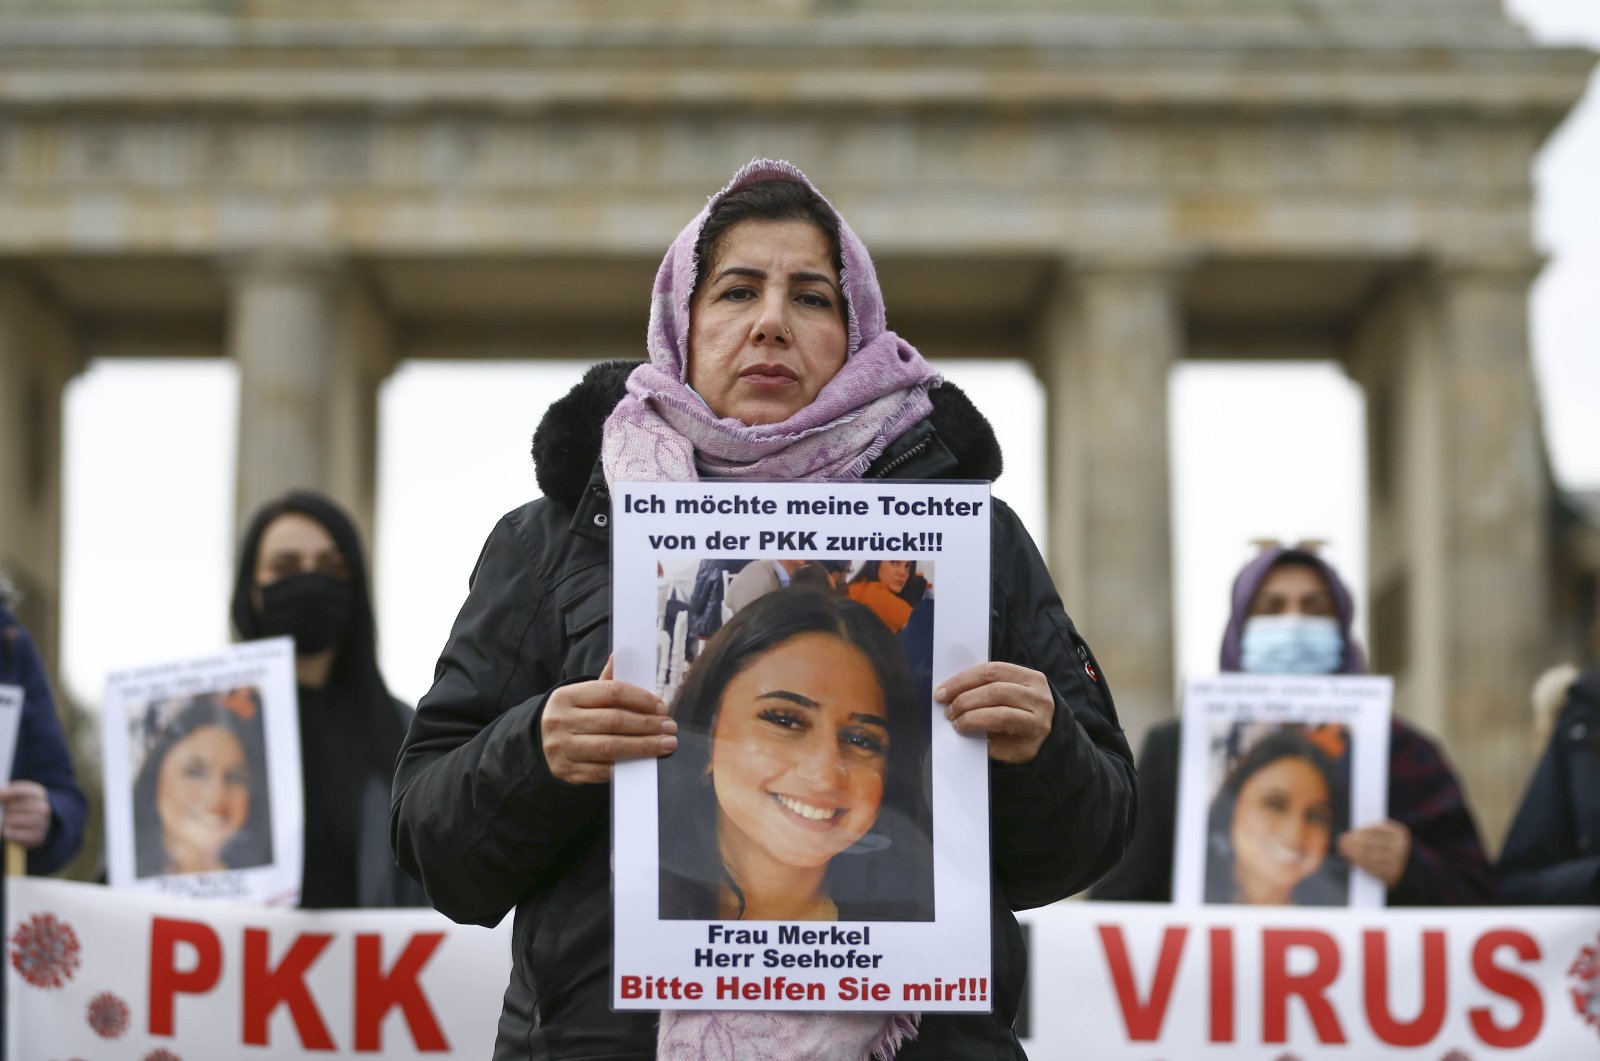 Maide T. holds a photo of her daughter, who was abducted by the PKK in a protest in front of Brandenburg Gate, Berlin, Germany, Nov. 17, 2020. (AA Photo)